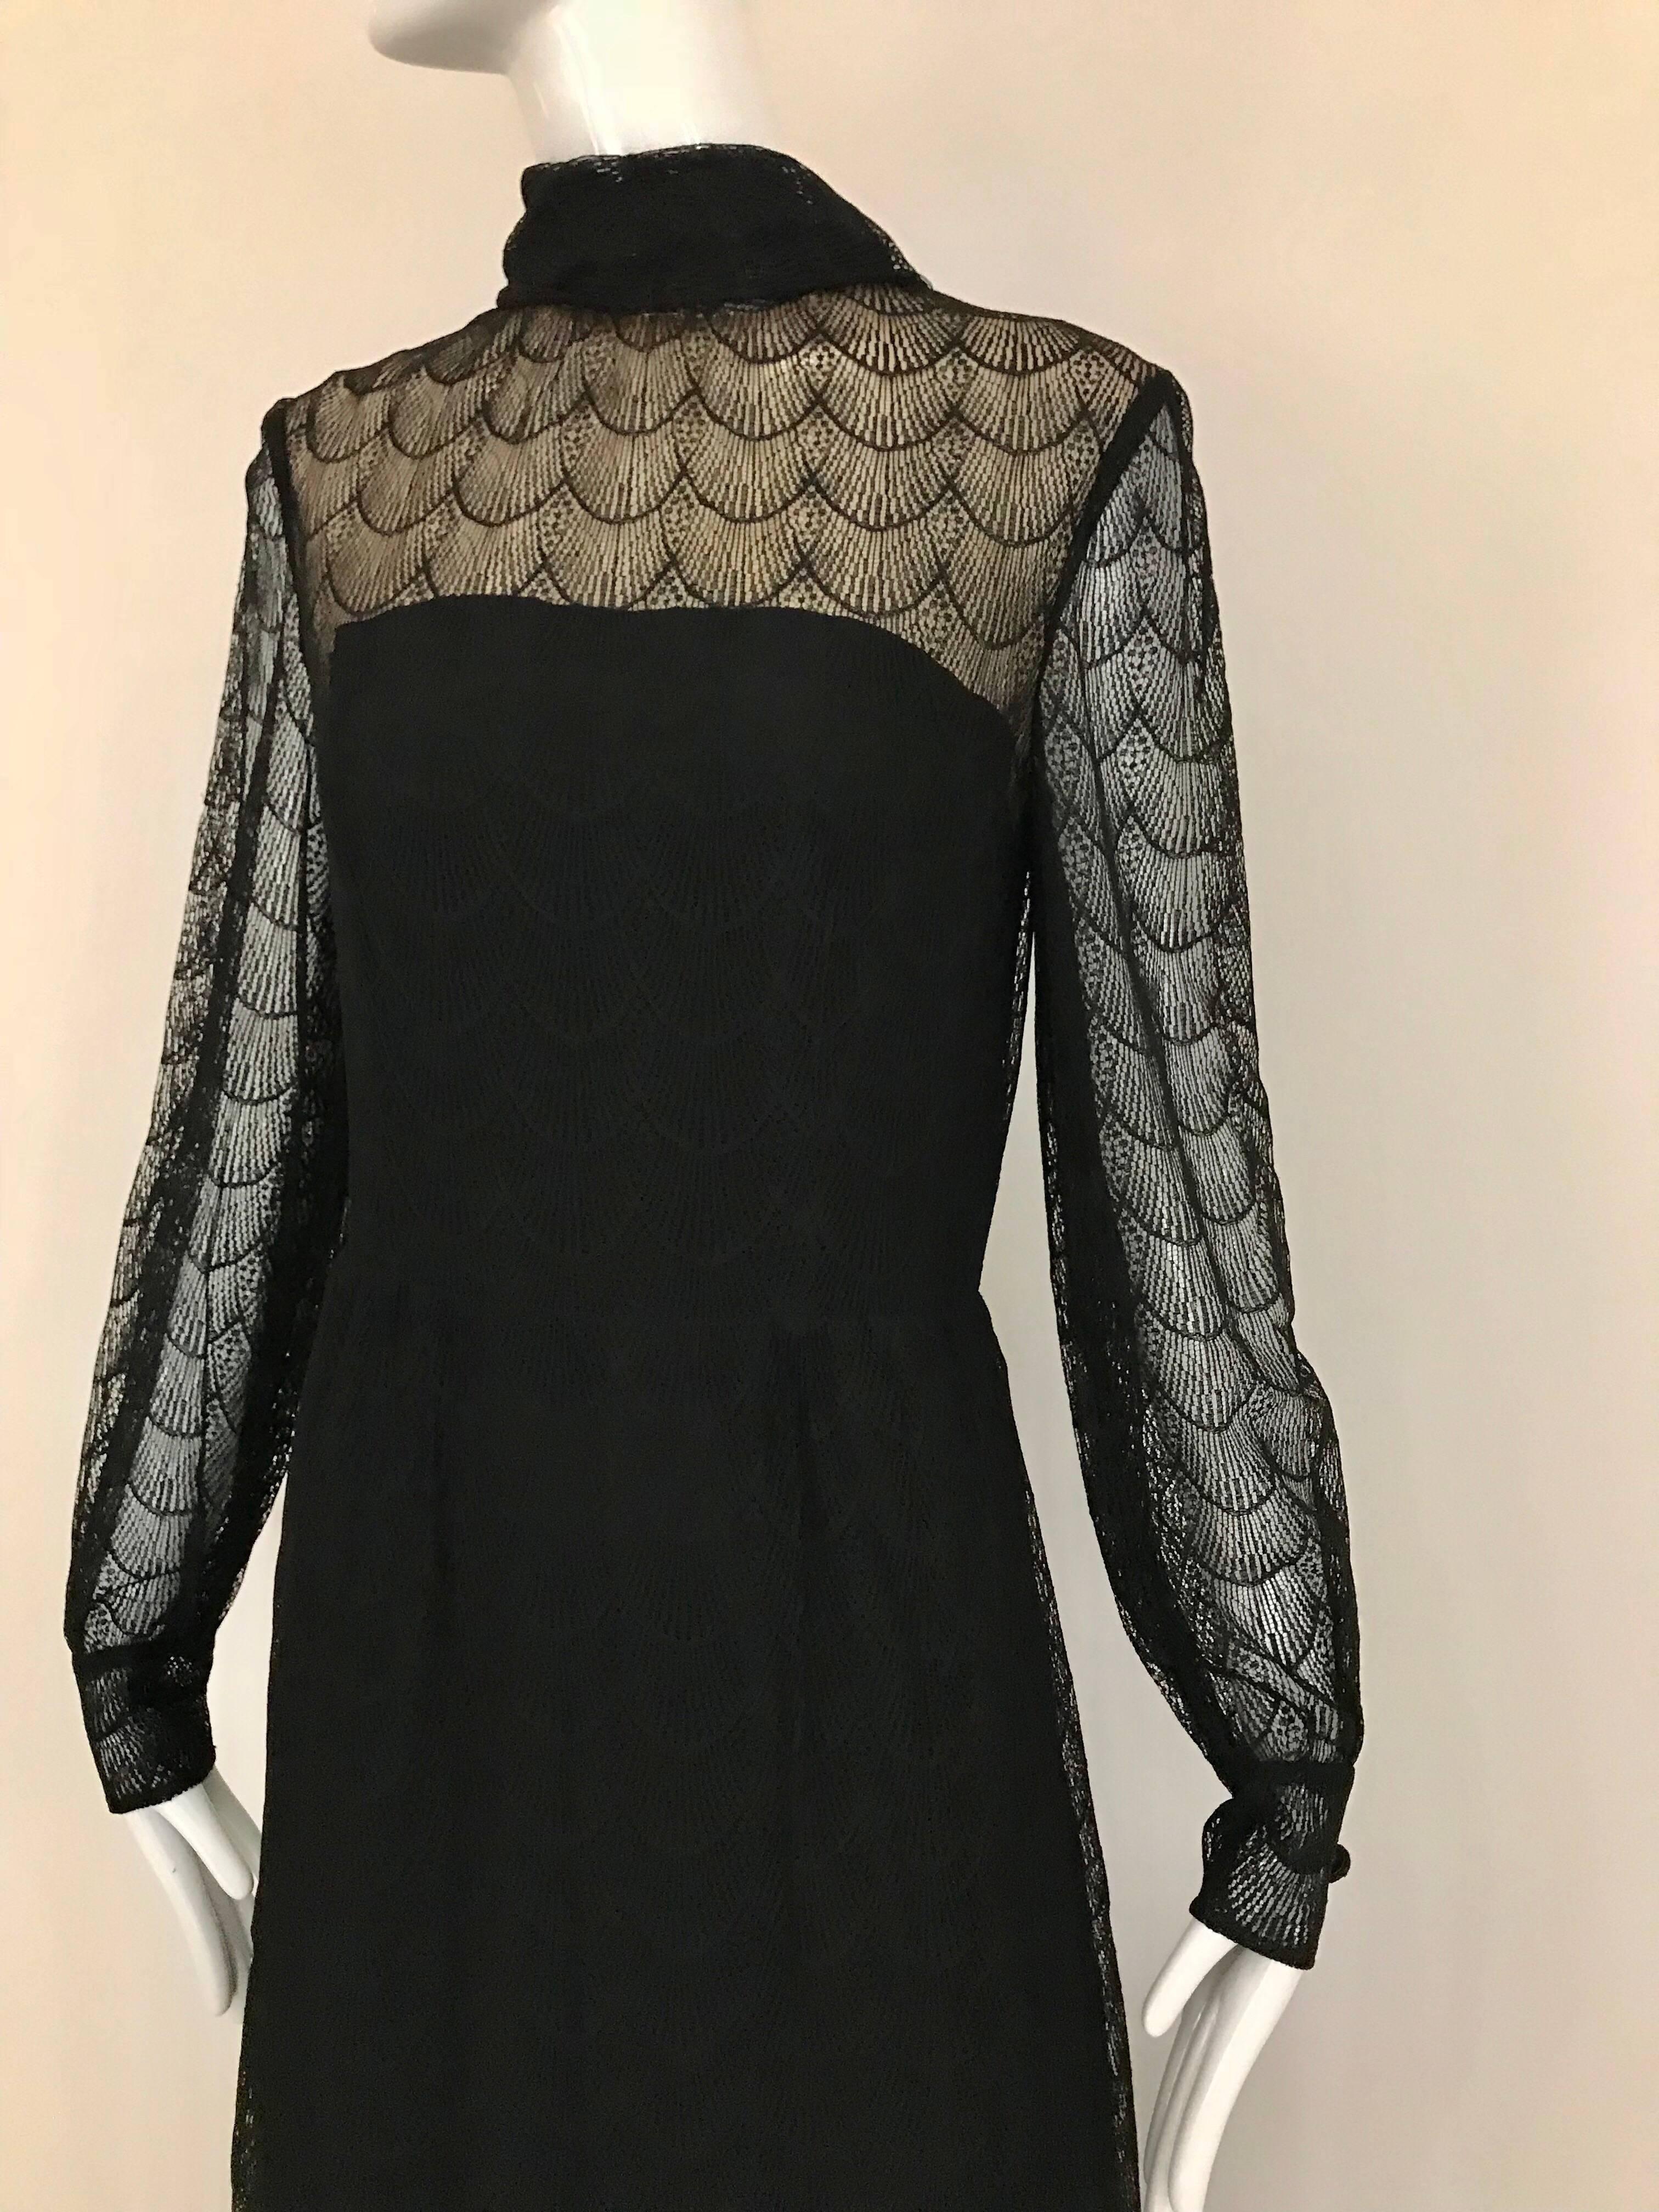 Beautiful 70s GIVENCHY black lace maxi dress cocktail party dress.
Dress is lined in silk.
 Bust 36' waist 28' hips 40' length 56'. Made in France.

